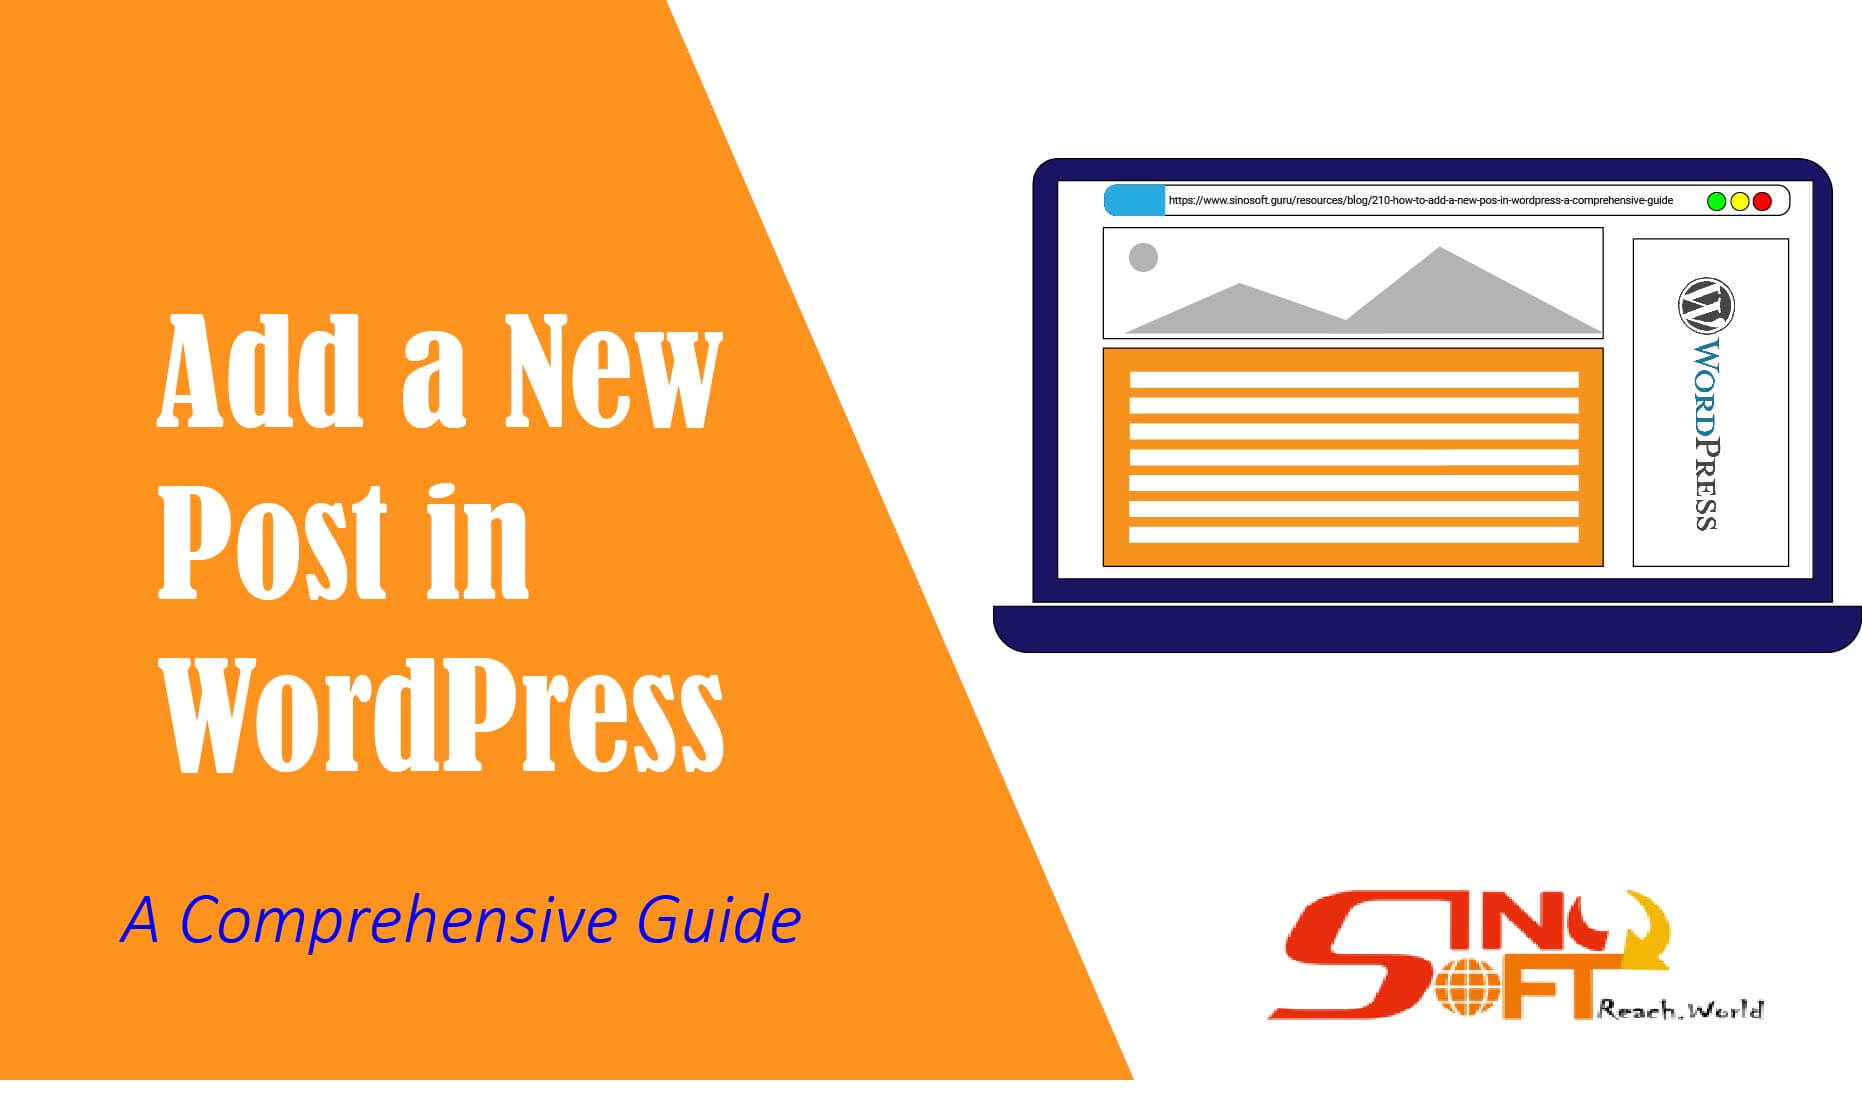 How To Add a New Post in WordPress – A Comprehensive Guide